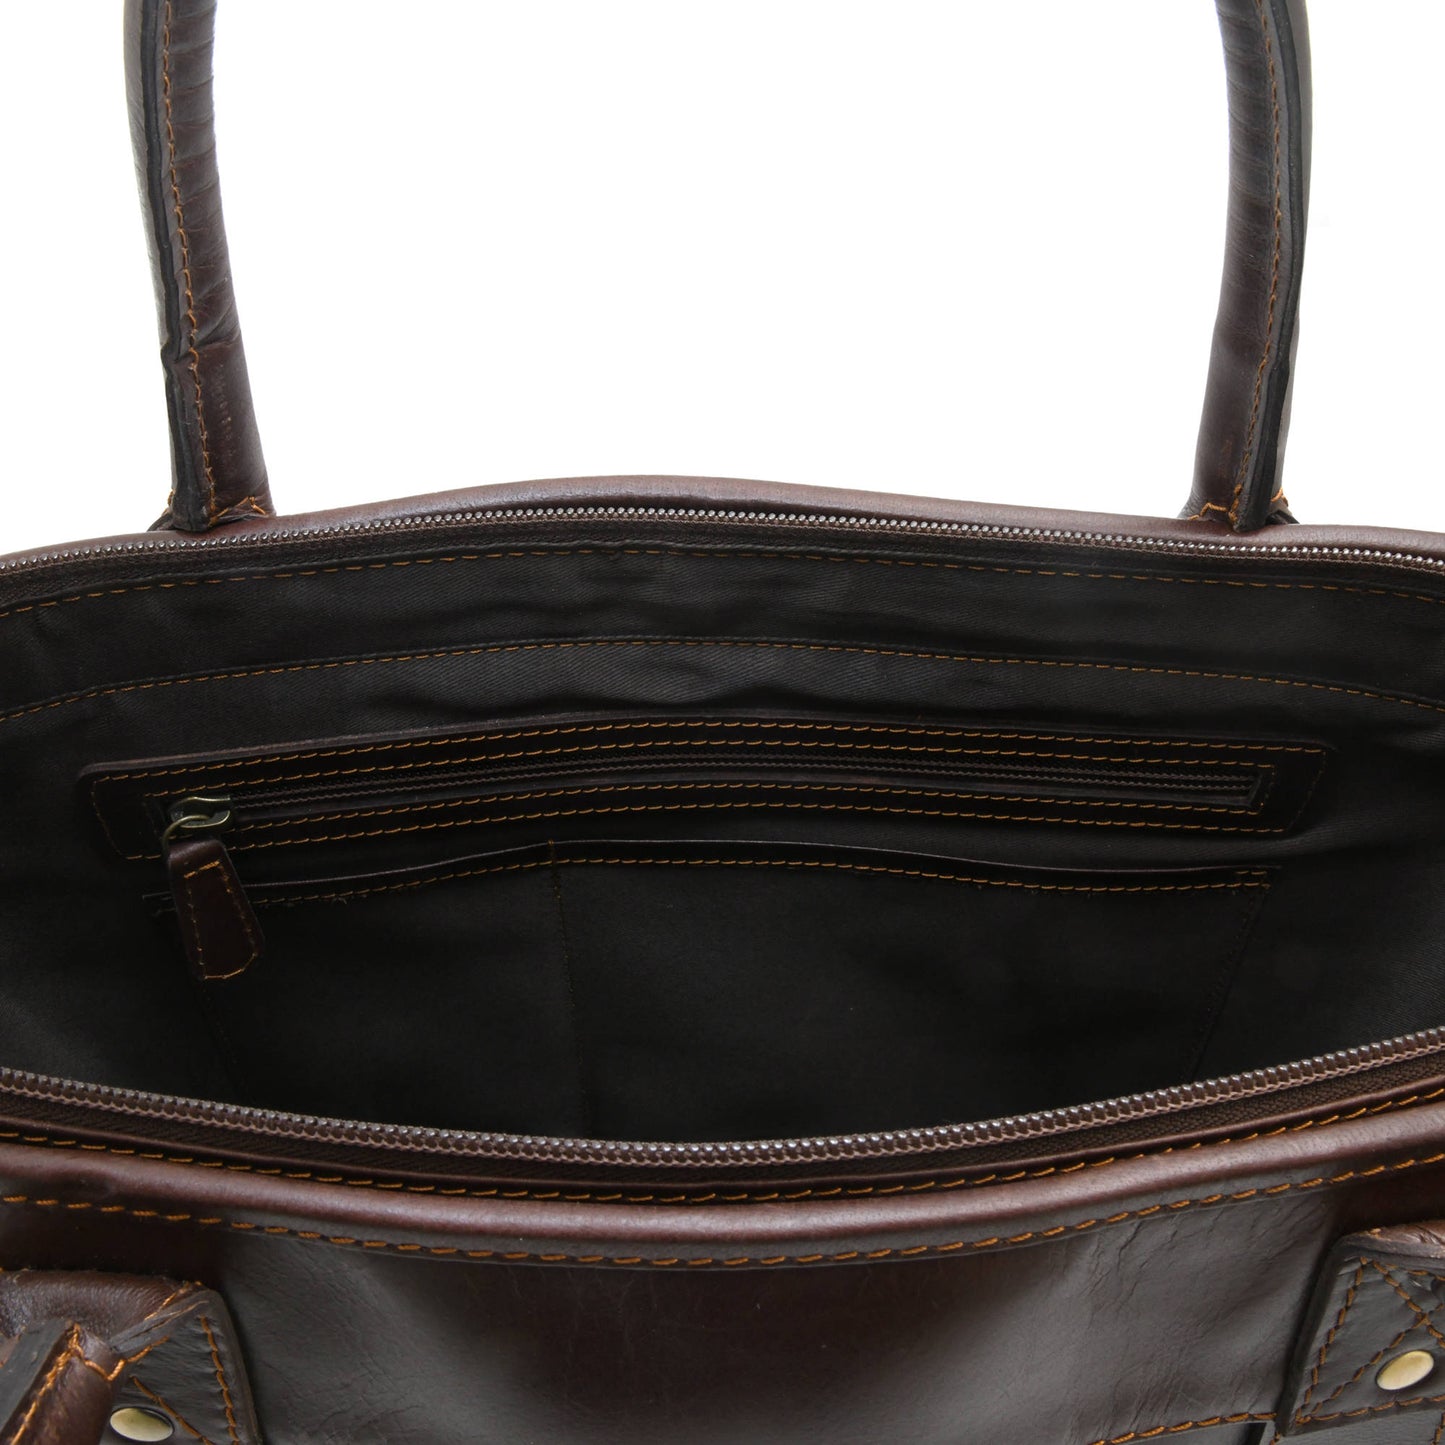 Style n Craft 392003 Men's Tote Bag in Full Grain Dark Brown Leather - Inside Back Wall Pockets - Closeup View